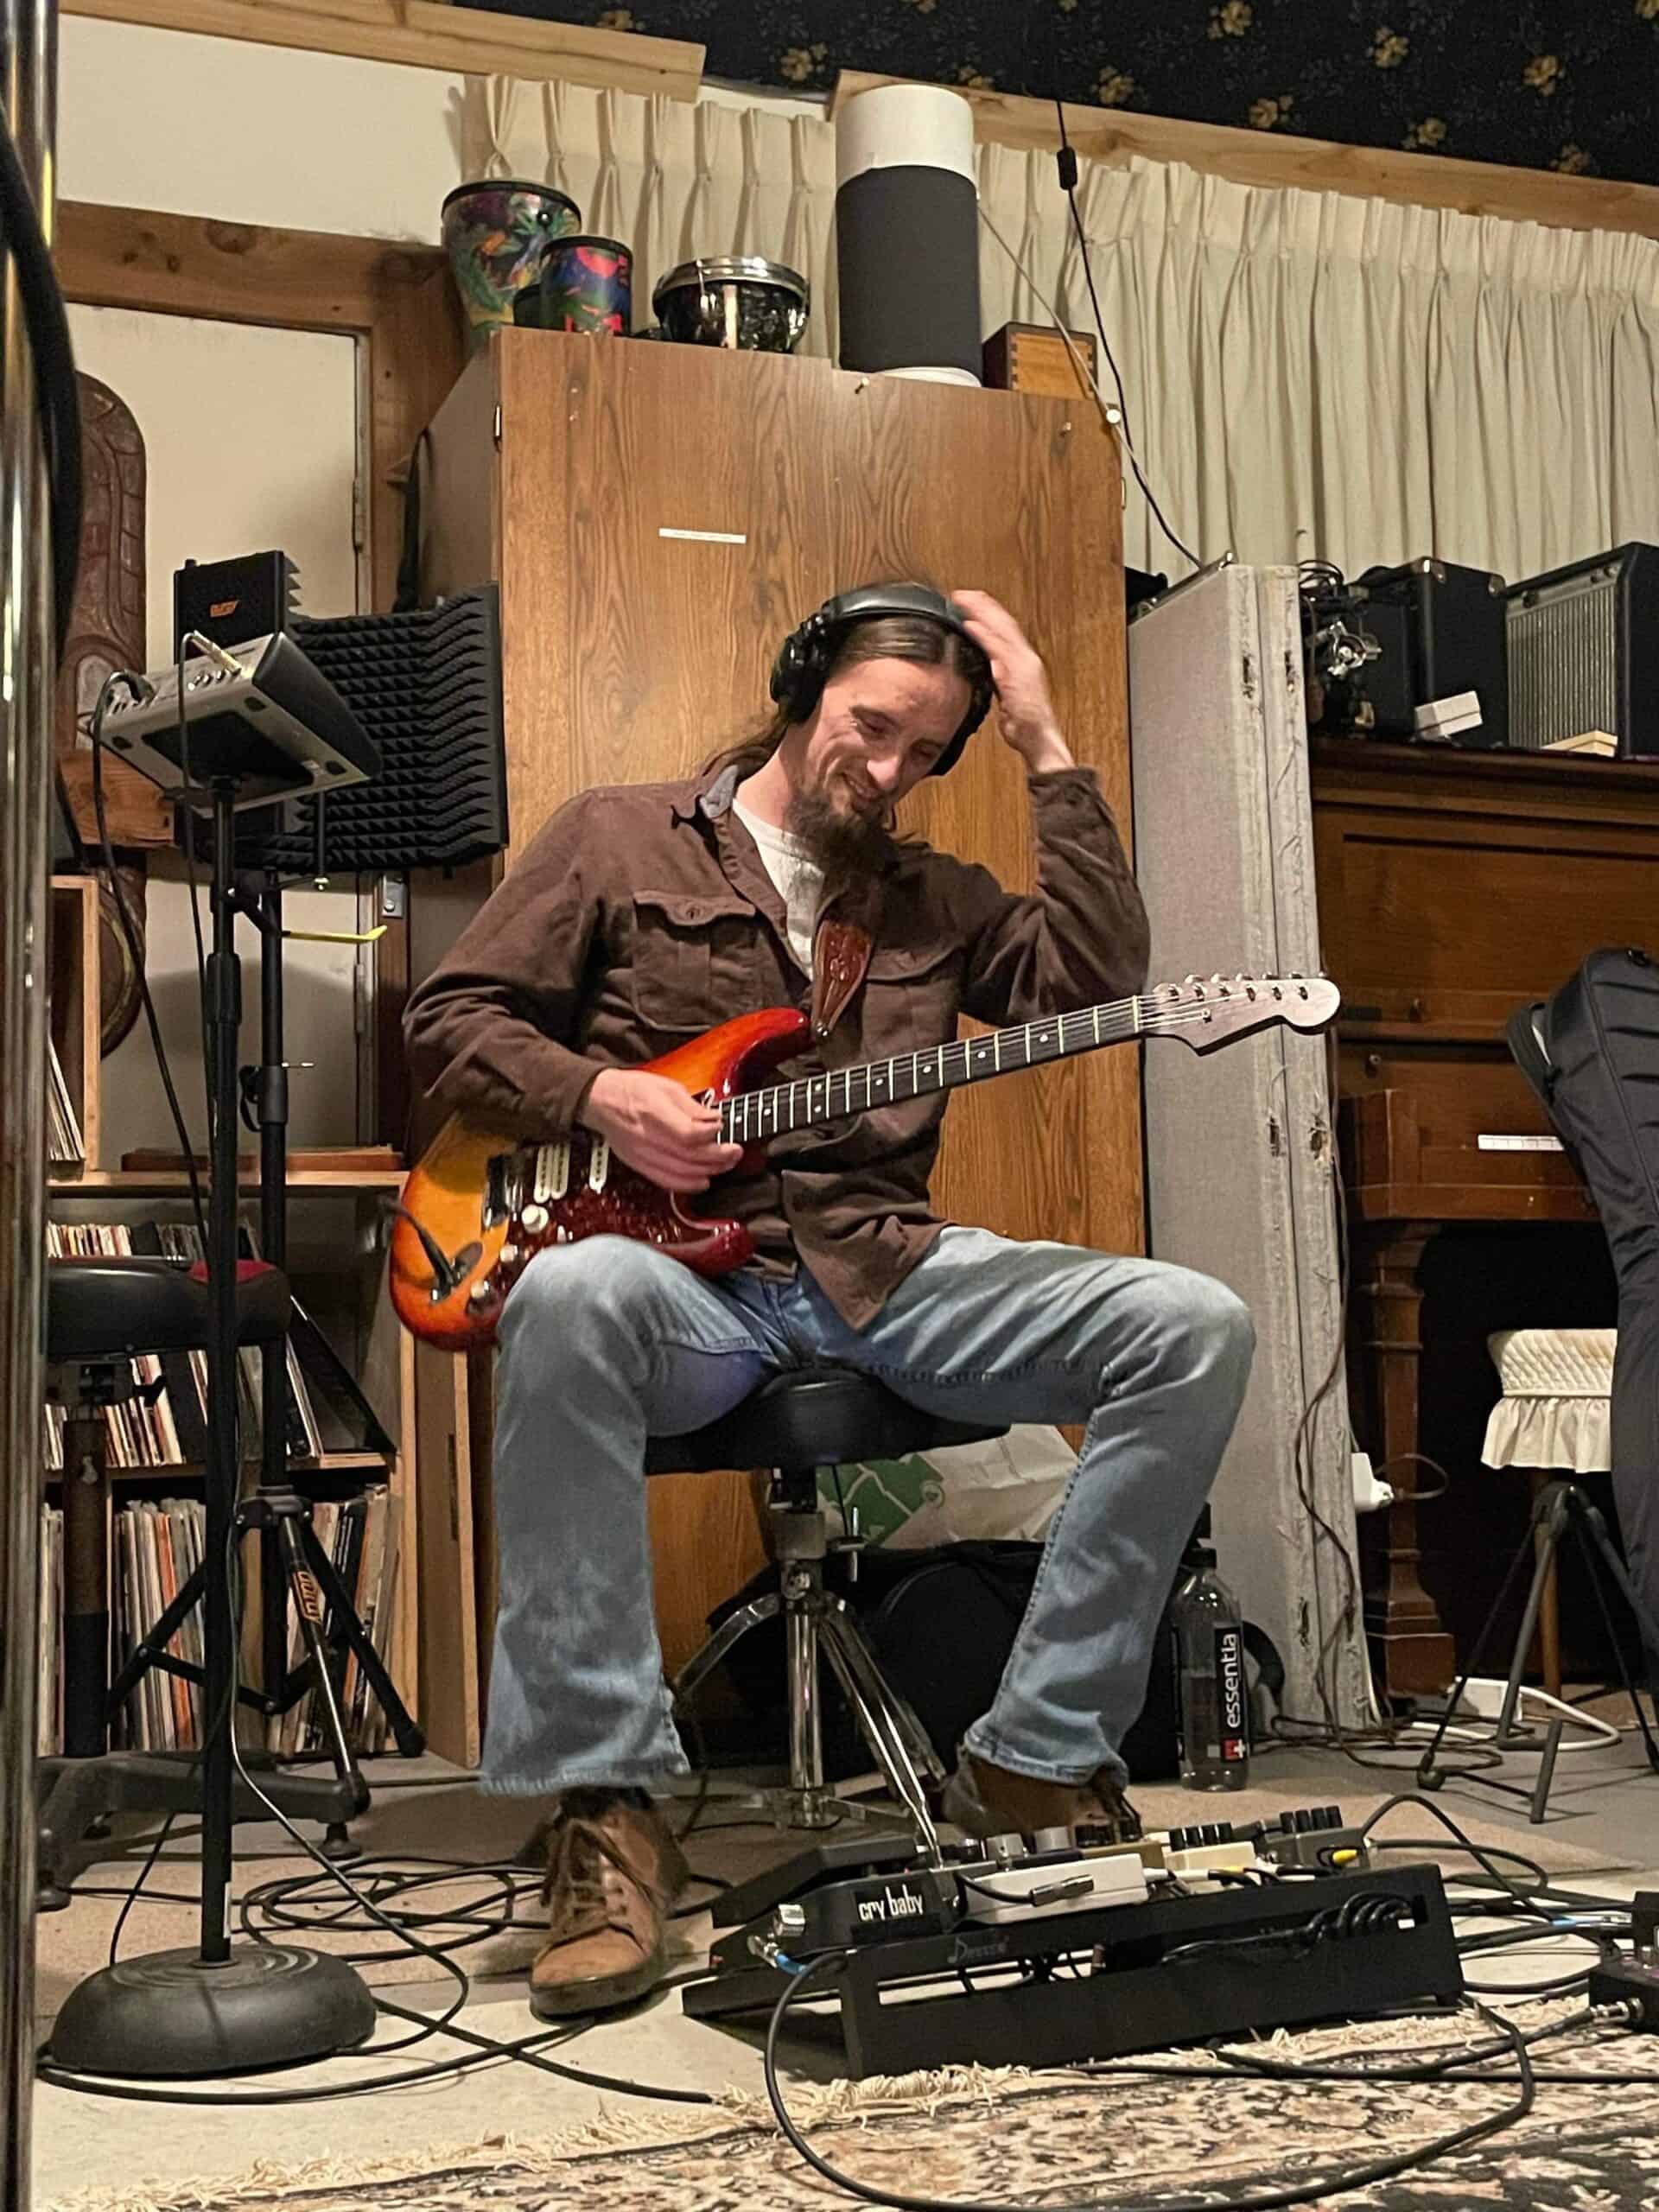 Picture of Brandon getting ready to record guitar in a recording studio.